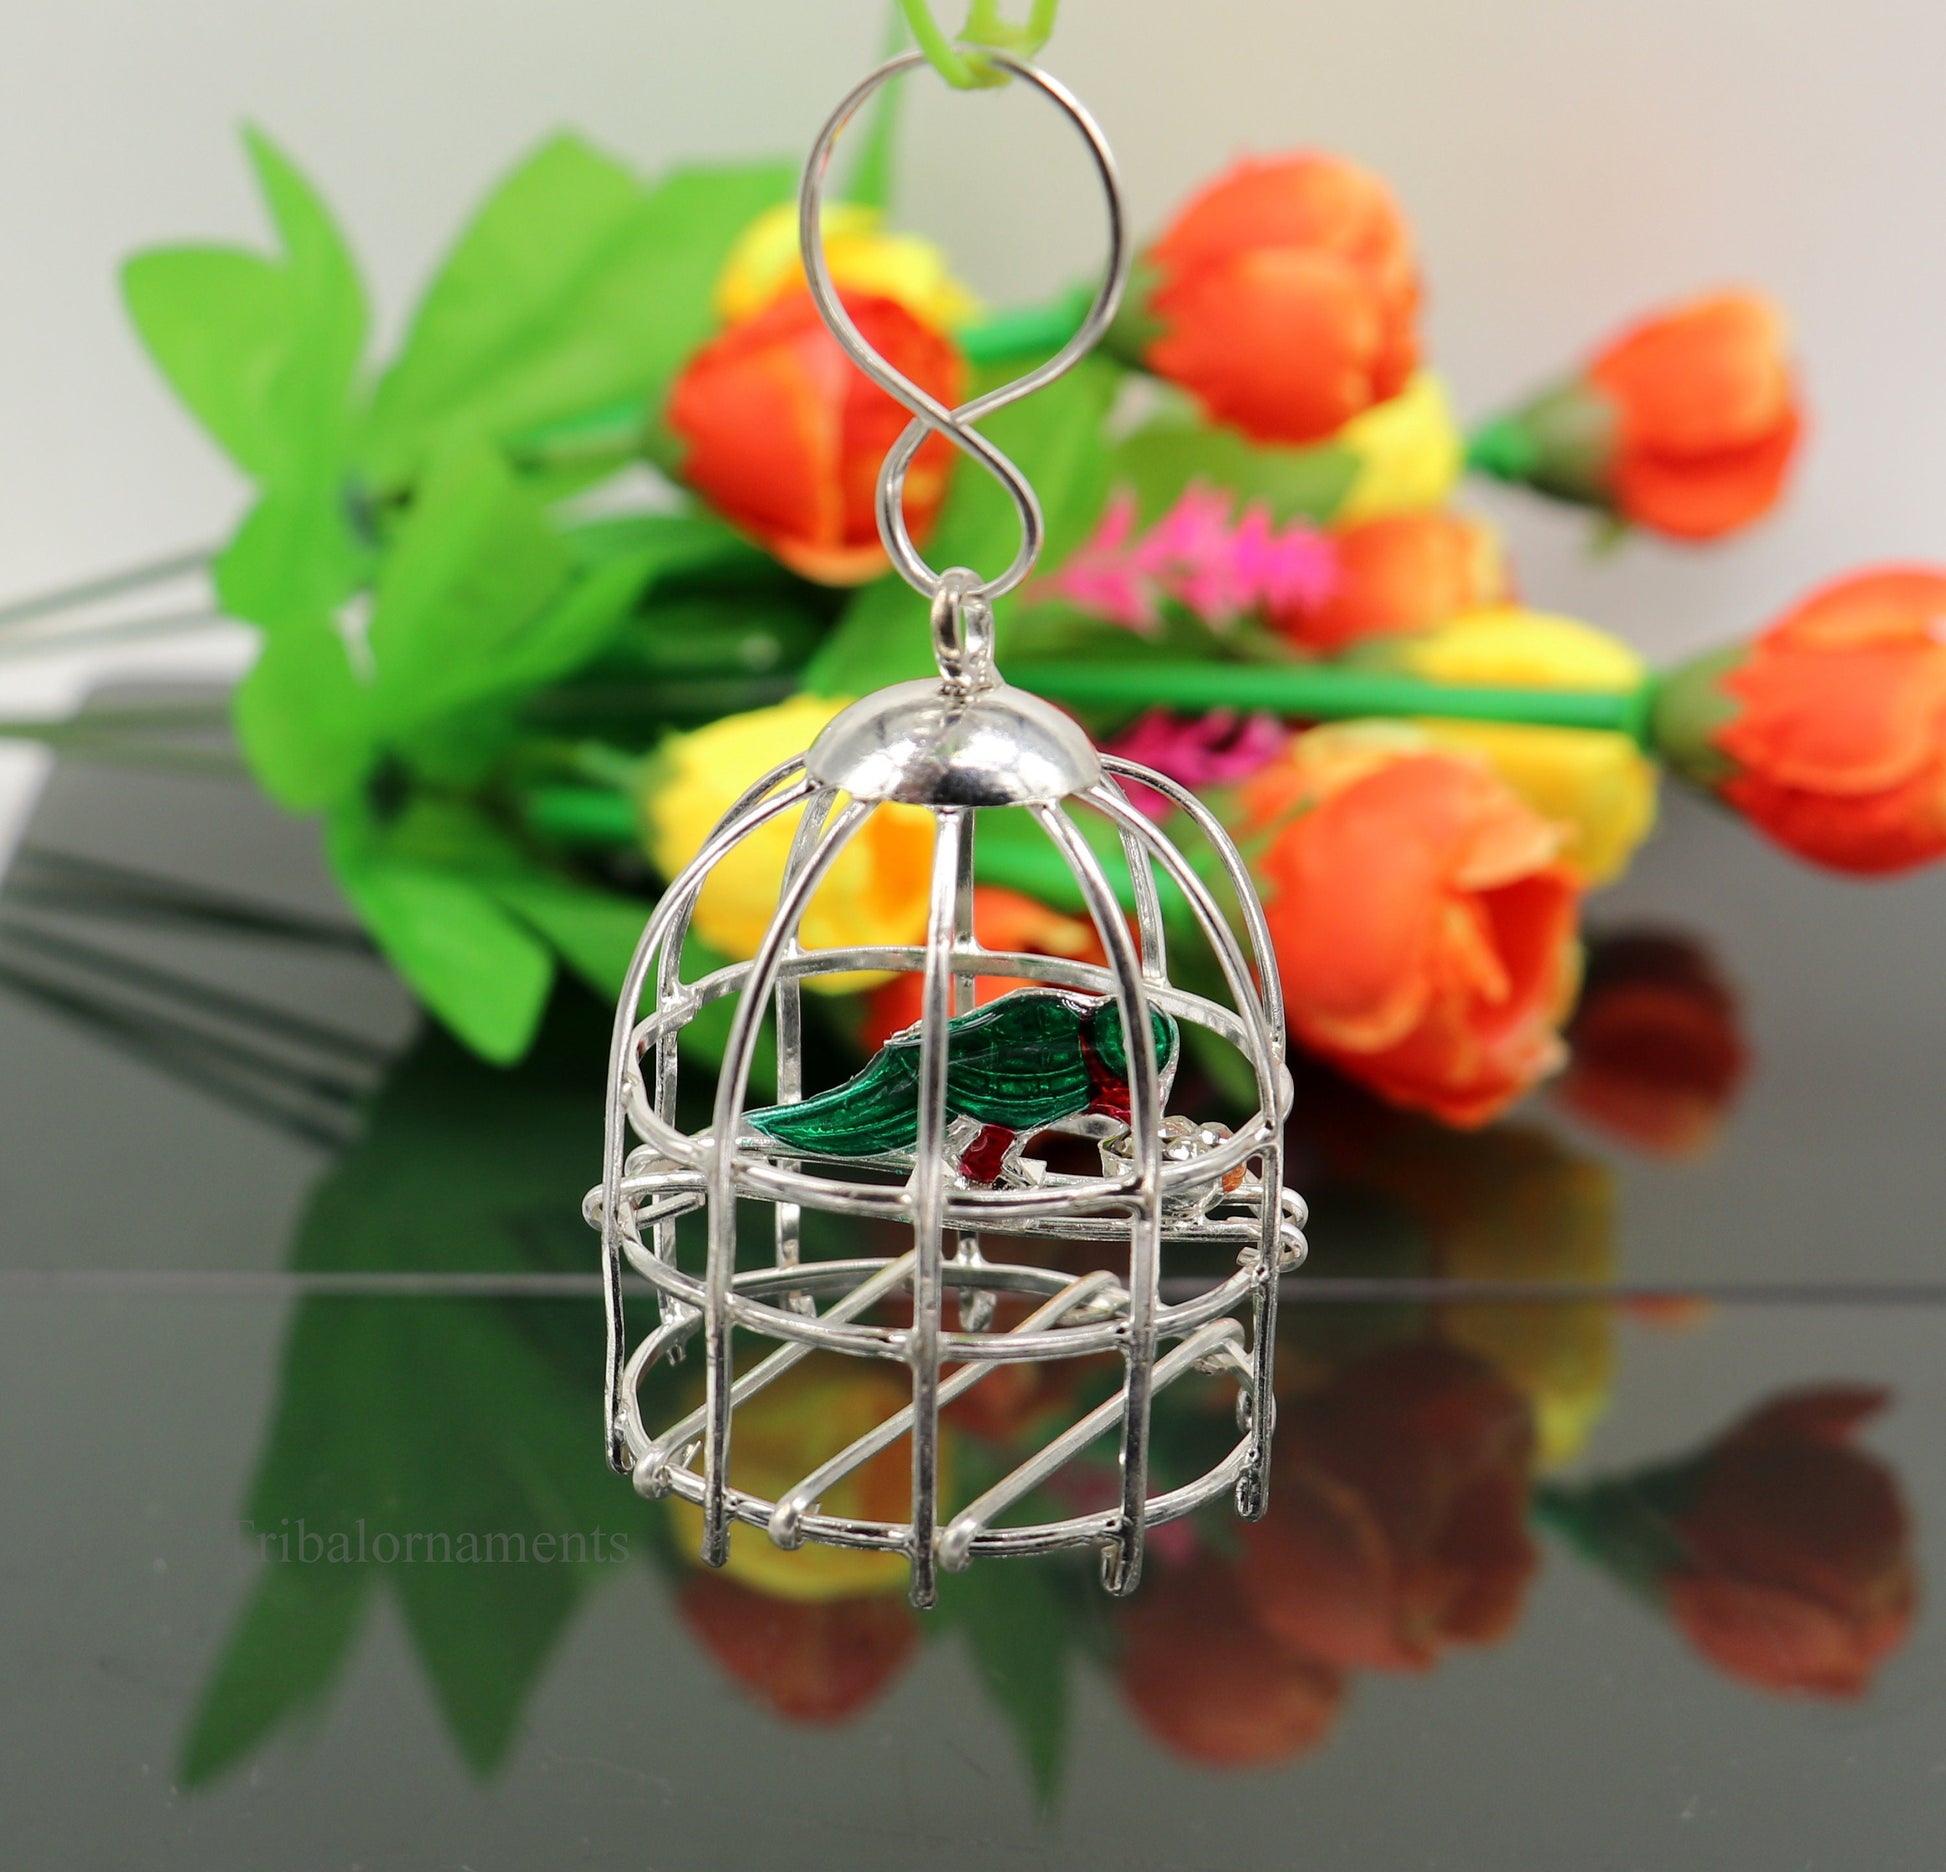 Solid sterling silver handmade toy for idol krishna, silver parrot with cage, silver article for gifting to God or idol Krishna,  su446 - TRIBAL ORNAMENTS